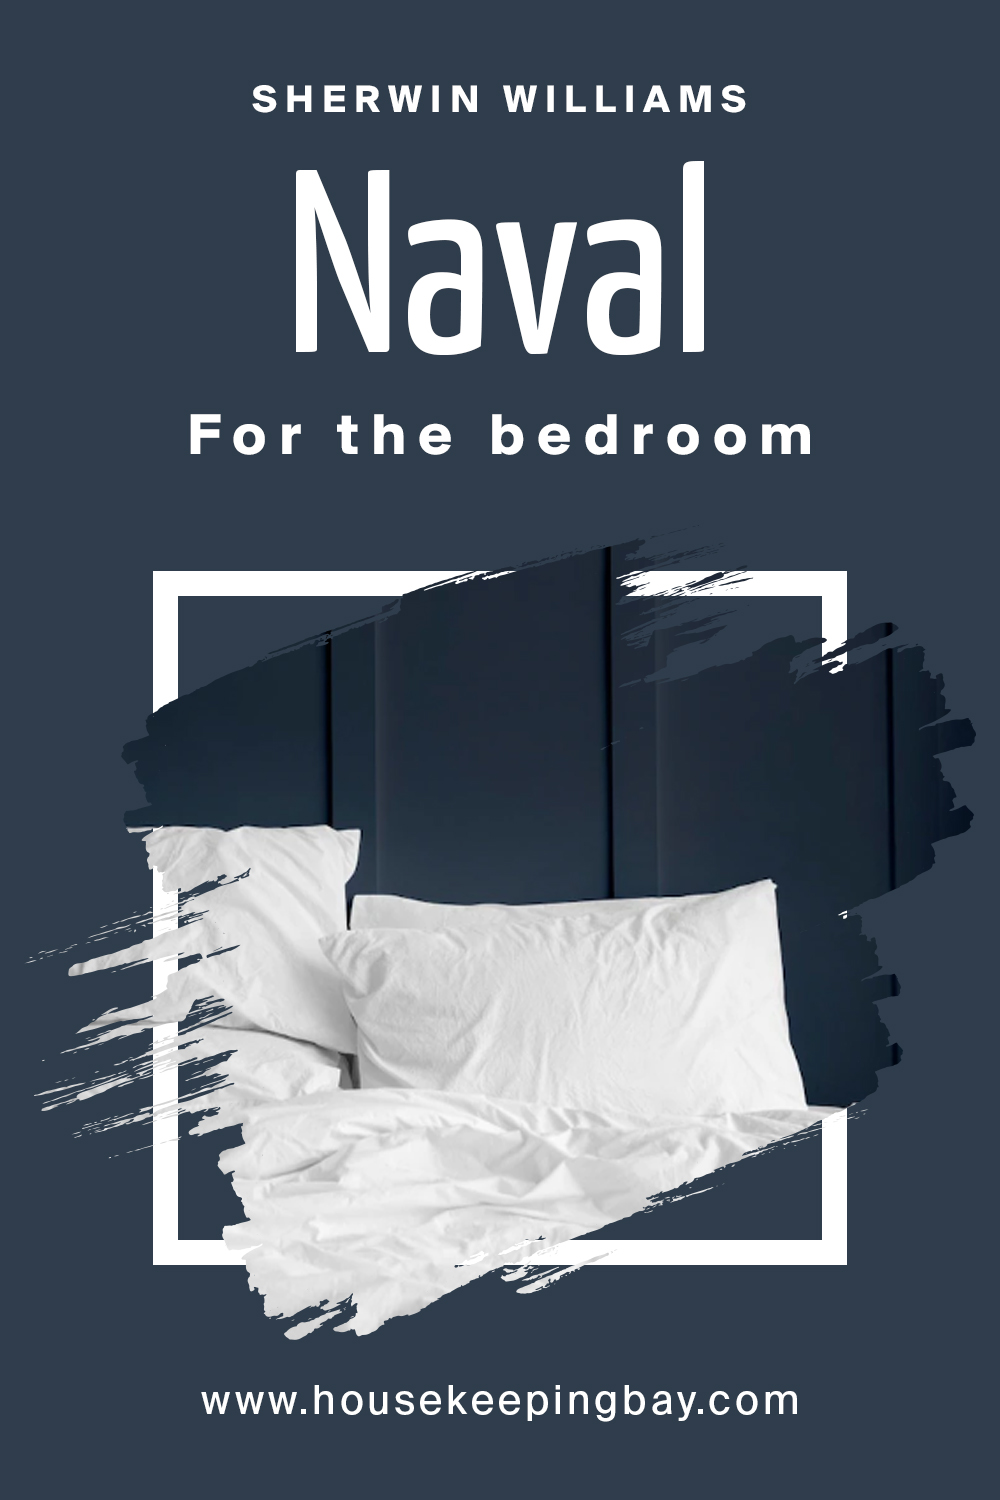 Sherwin Williams. Naval For the bedroom